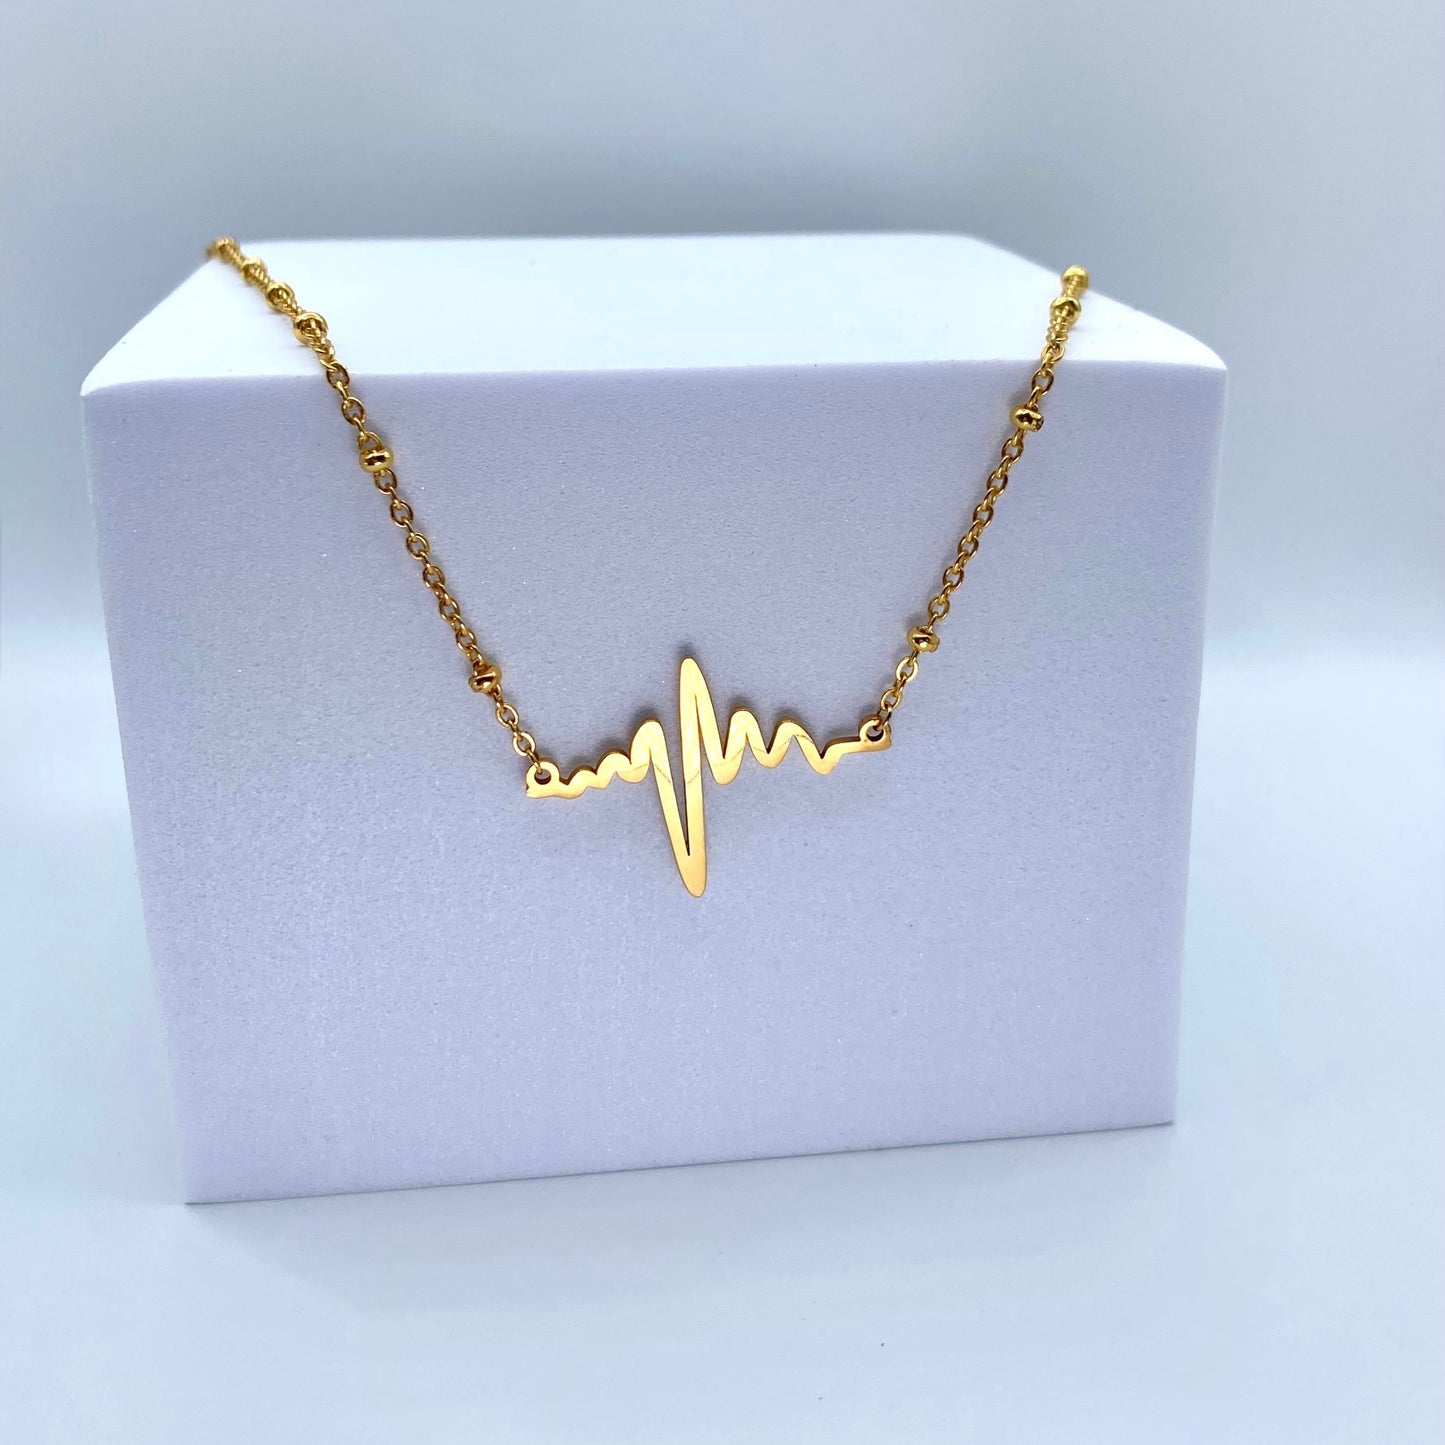 "Cupid’s Chokehold" Heartbeat Necklace